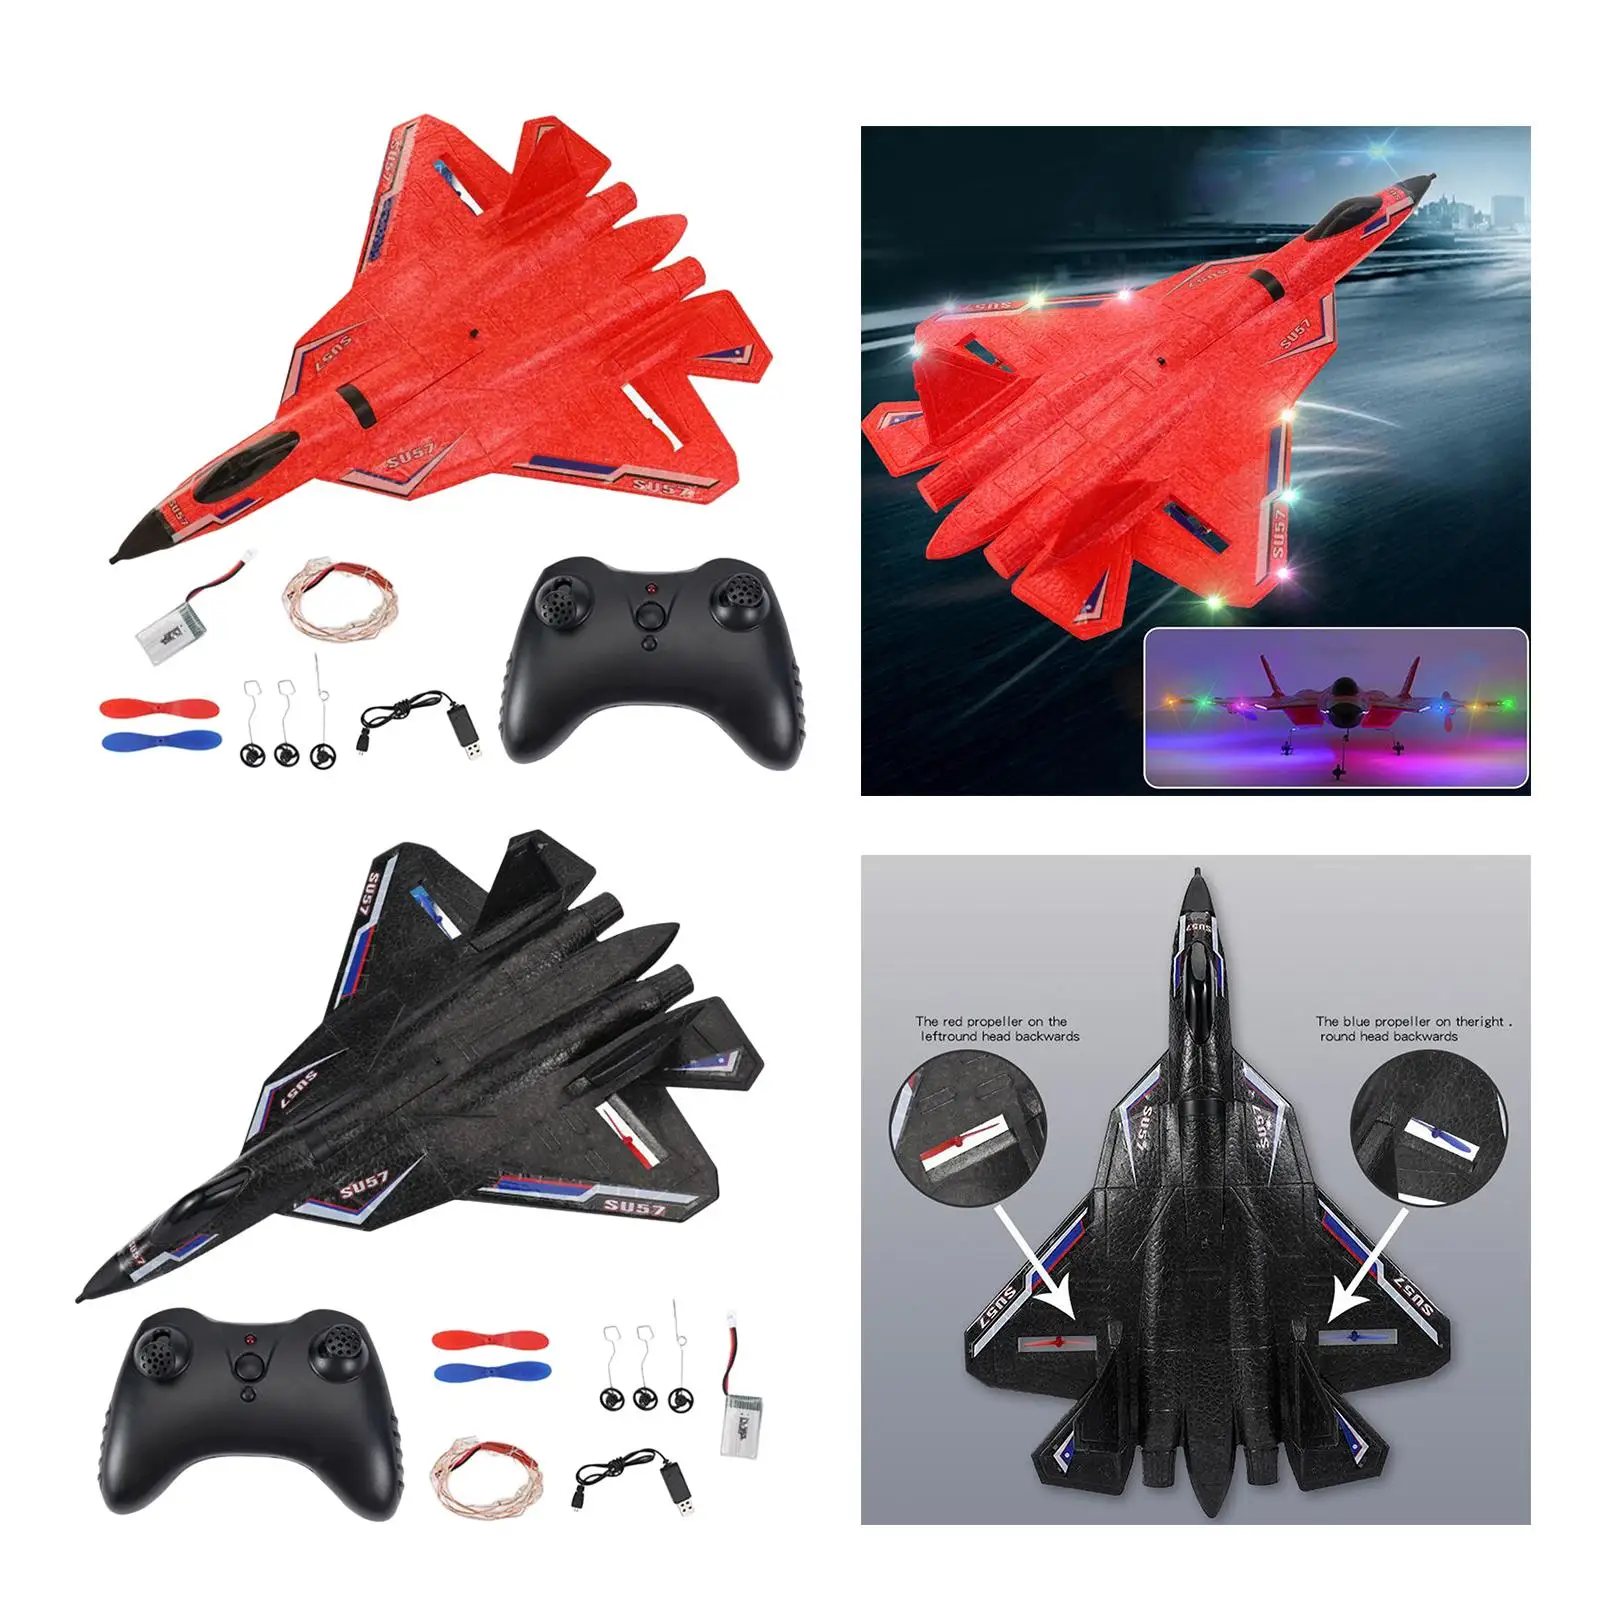 2CH EPP Foam RC Aircraft Fixed-Wing SU-57 Glider Waterproof Sea Land Air Flying Easy to Control for Beginner